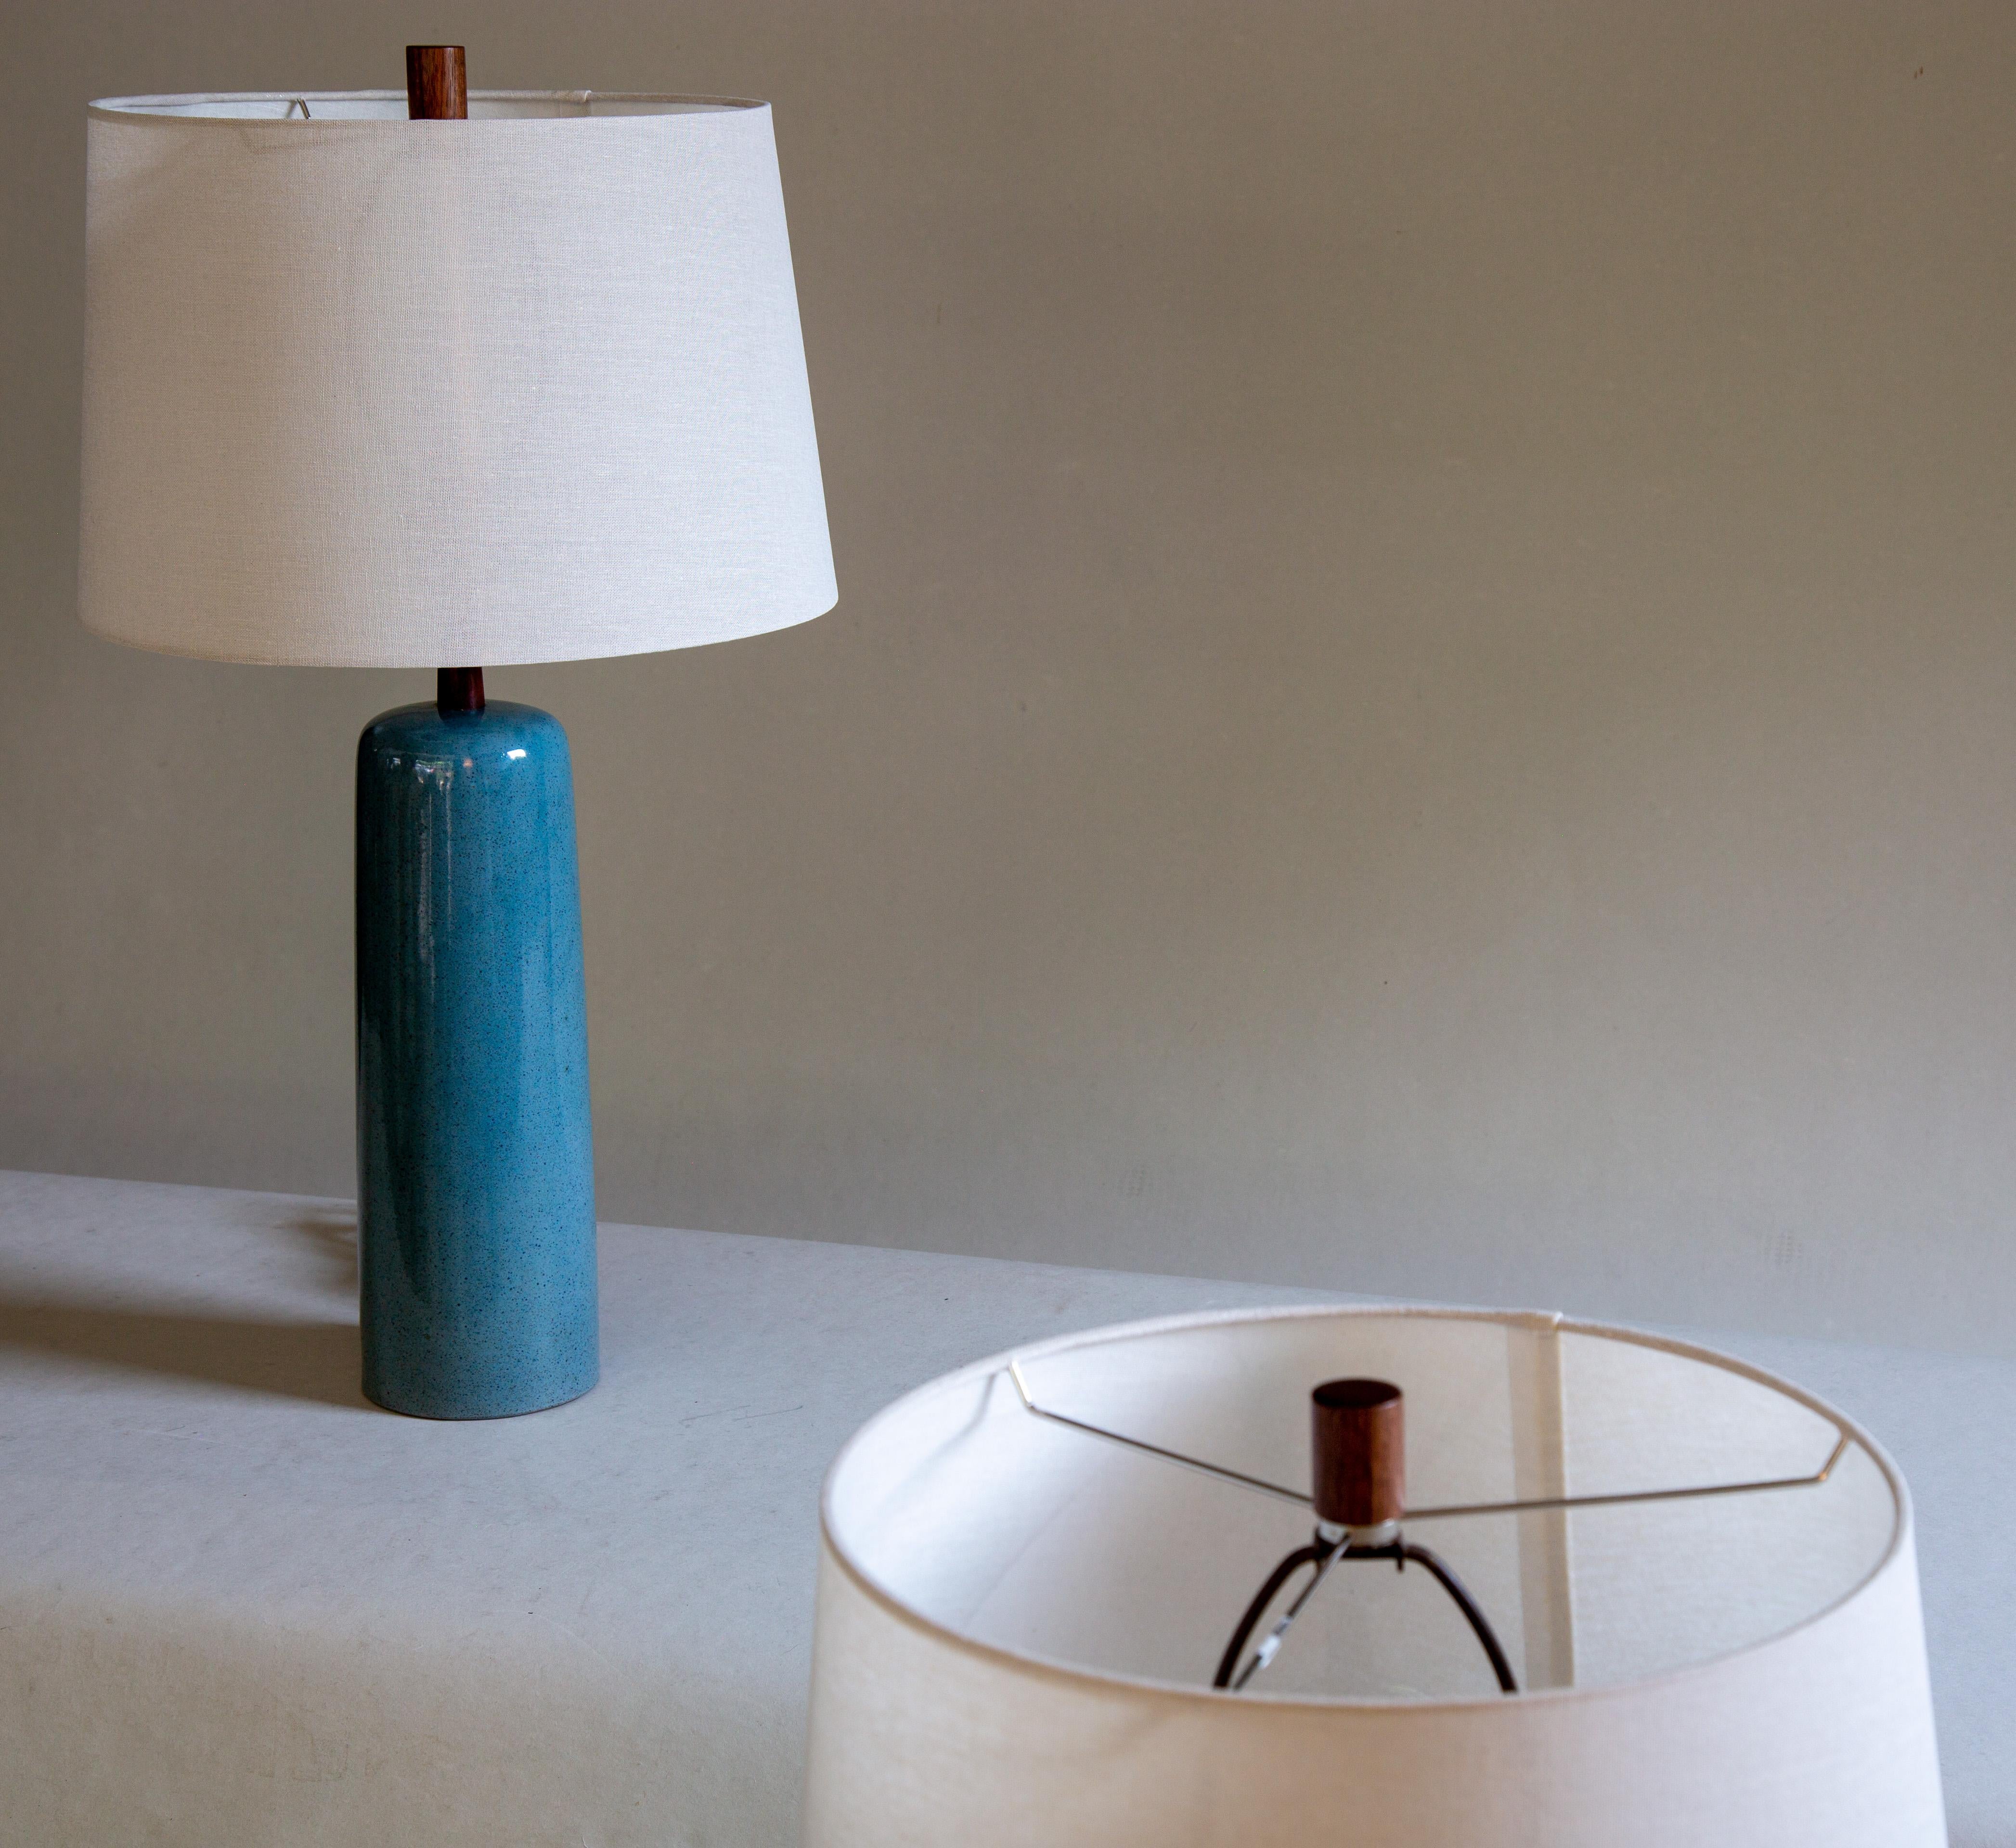 American Pair of Robins Egg Blue Jane and Gordon Martz Table Lamps M41 Mid Century Modern